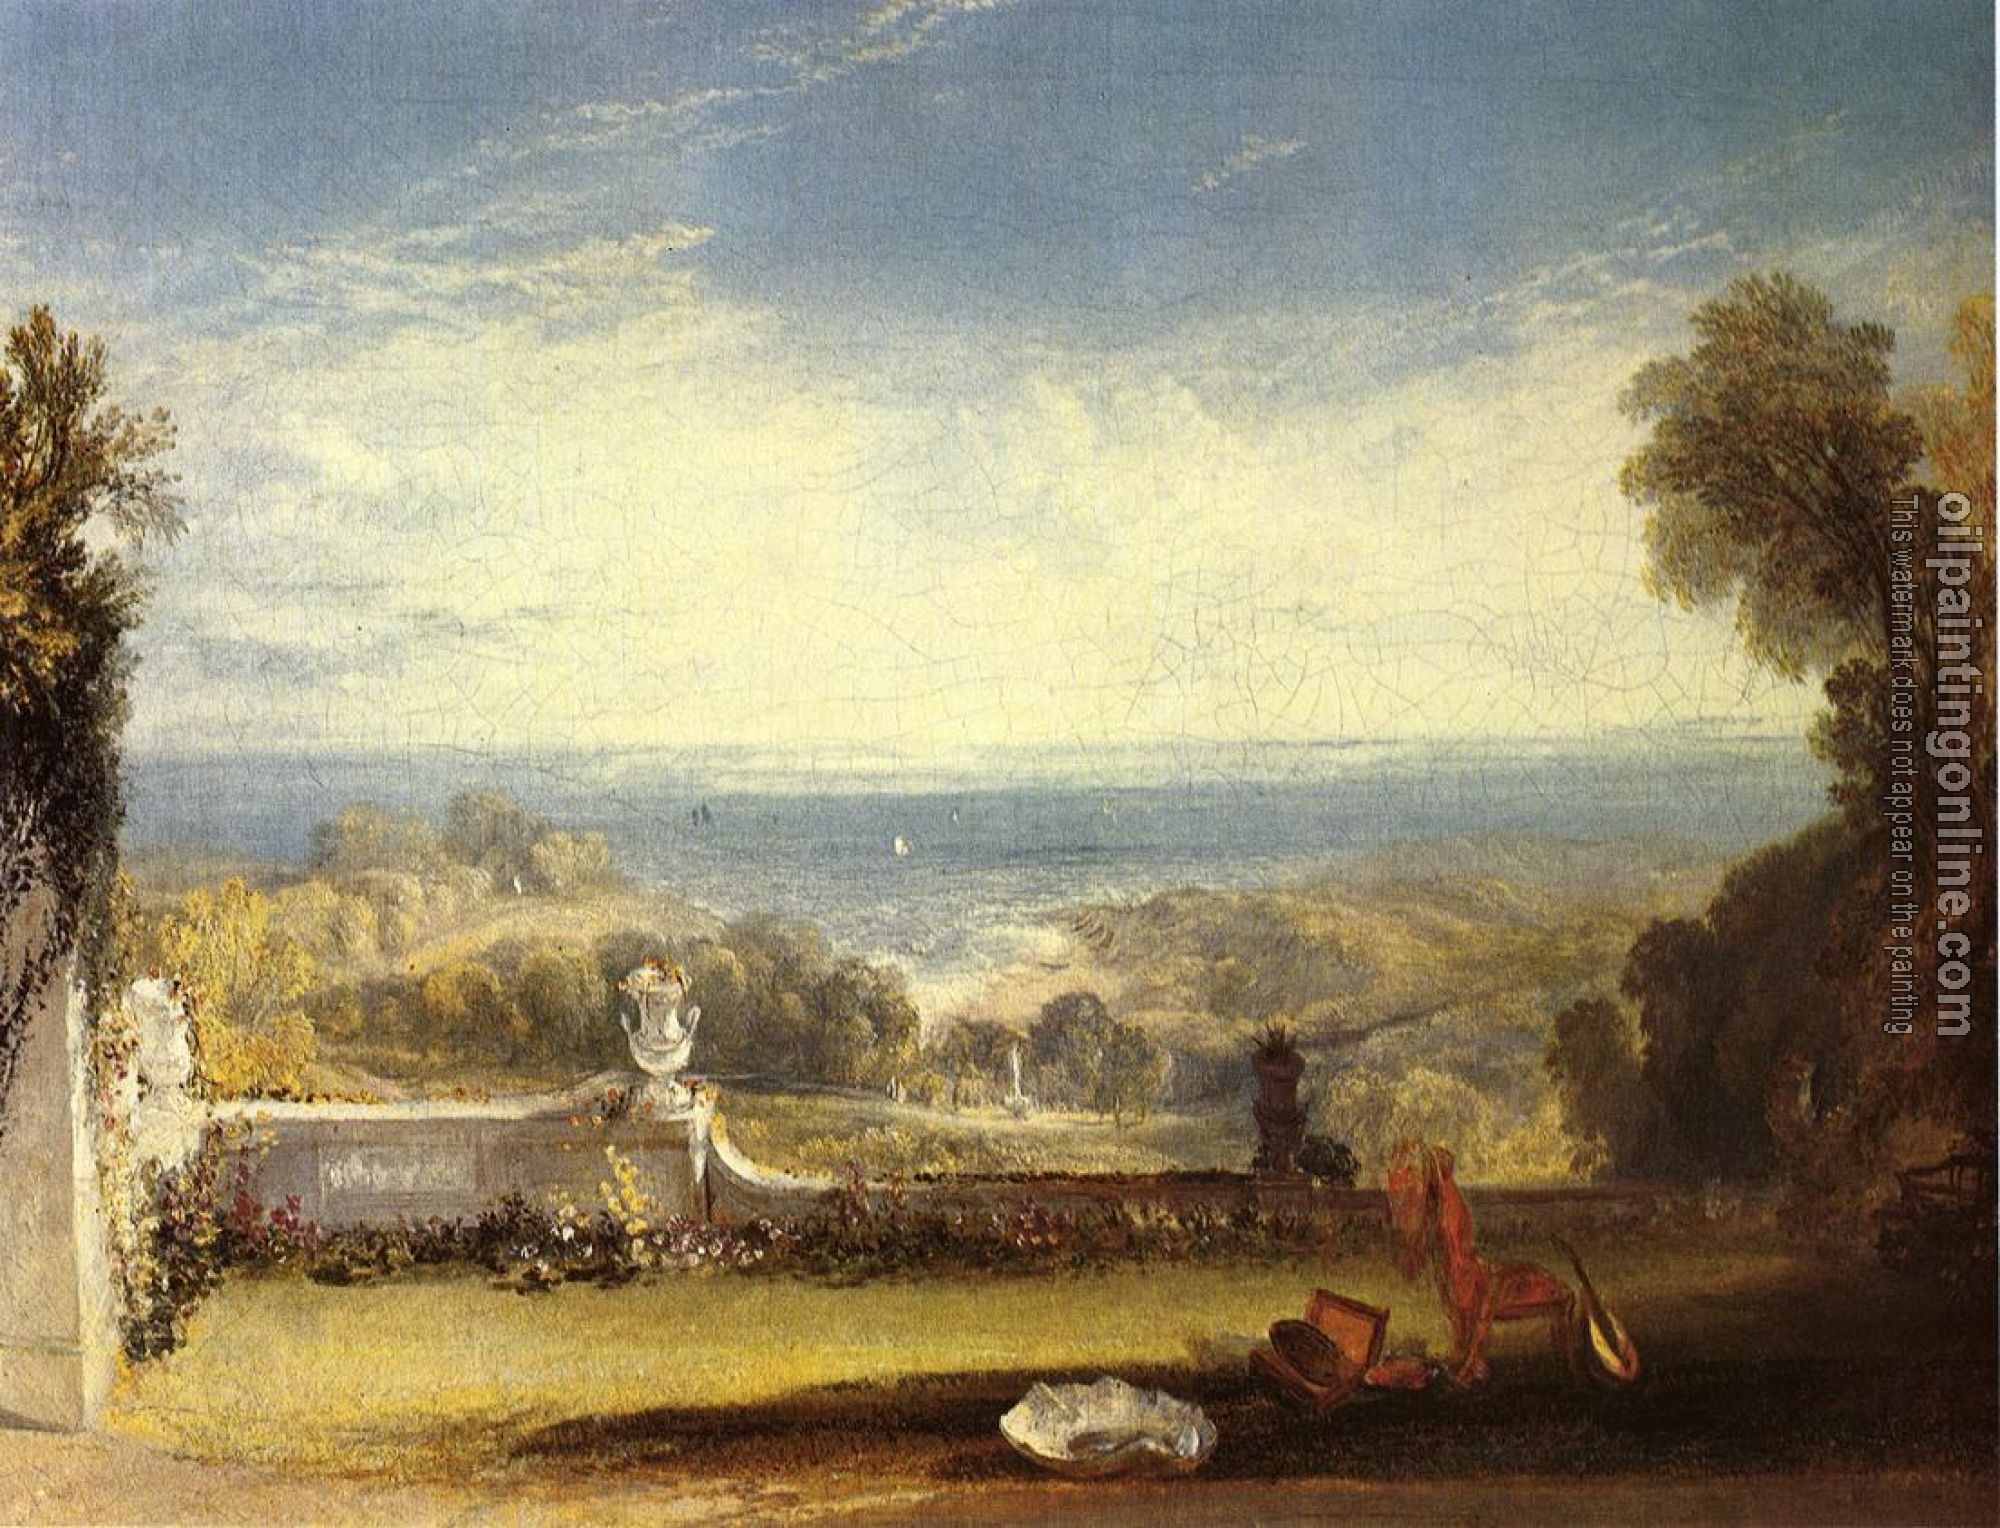 Turner, Joseph Mallord William - View from the Terrace of a Villa at Niton, Isle of Wight, from sketches by a lady